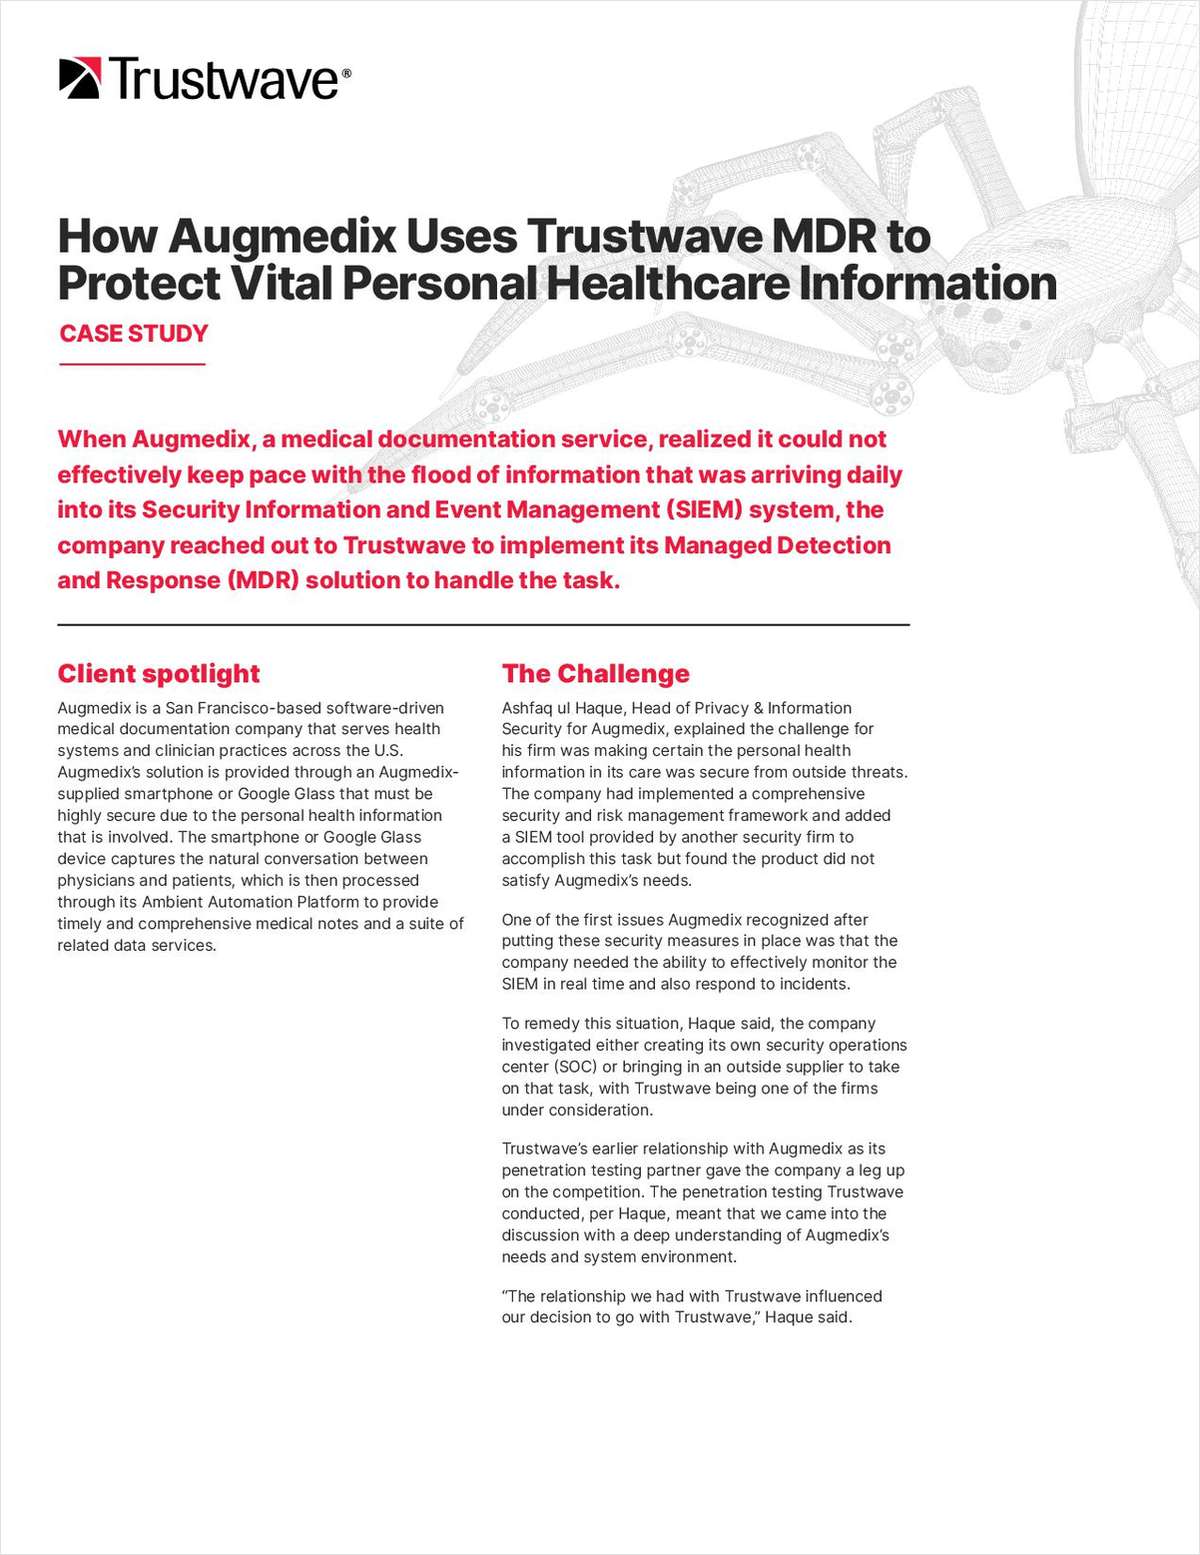 How Augmedix Uses Trustwave MDR to Protect Vital Personal Healthcare Information